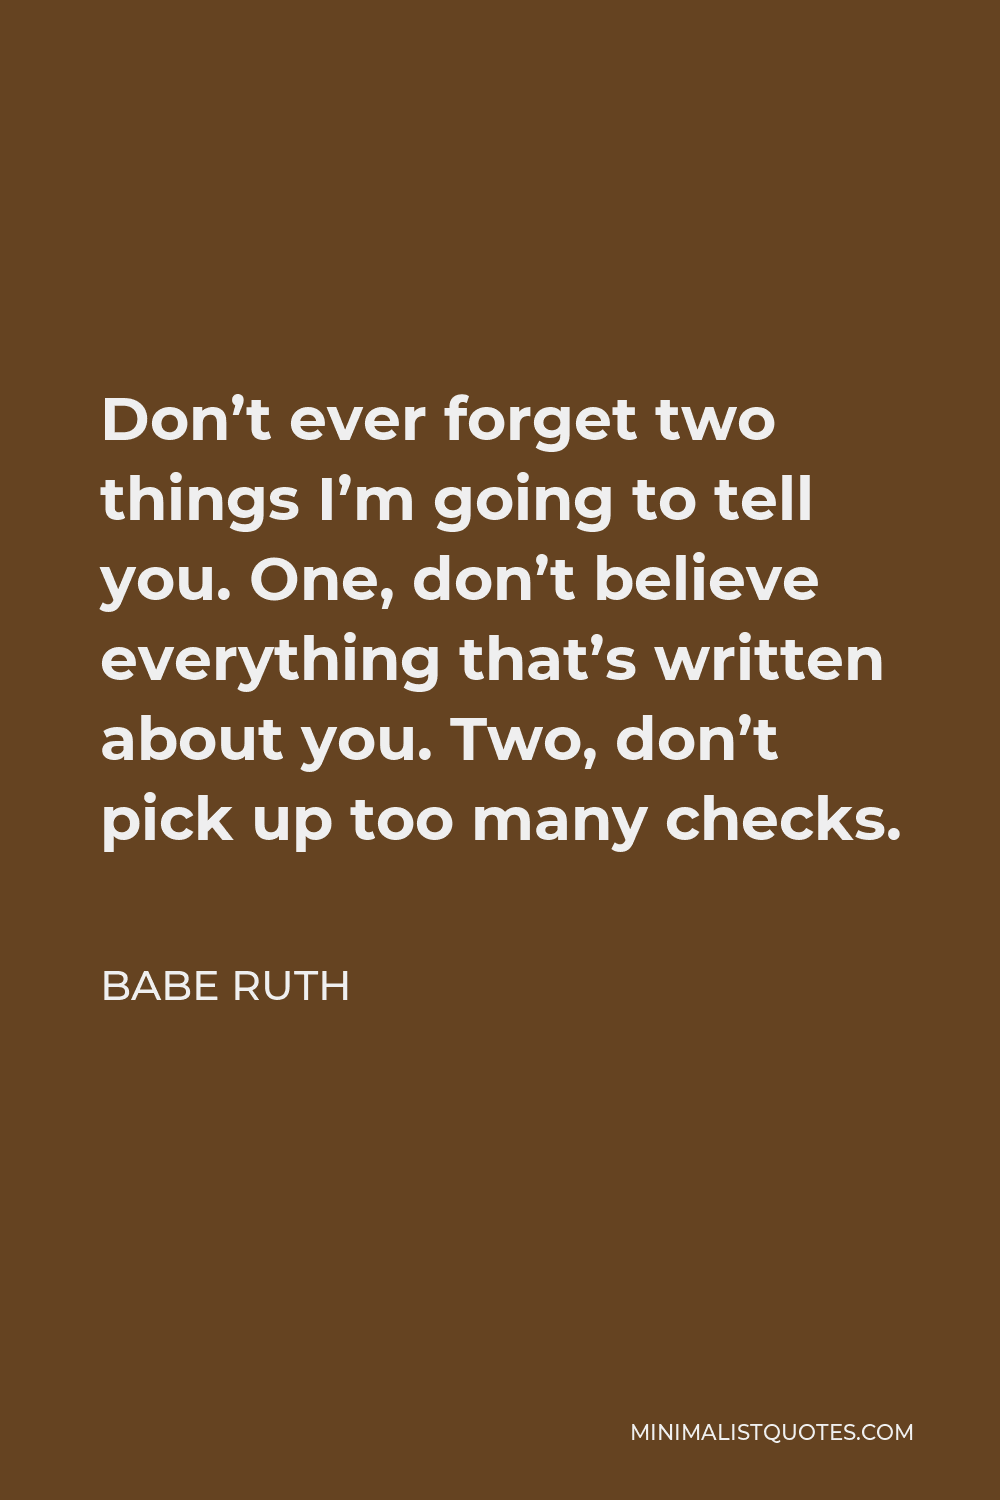 Babe Ruth Quote - Don’t ever forget two things I’m going to tell you. One, don’t believe everything that’s written about you. Two, don’t pick up too many checks.